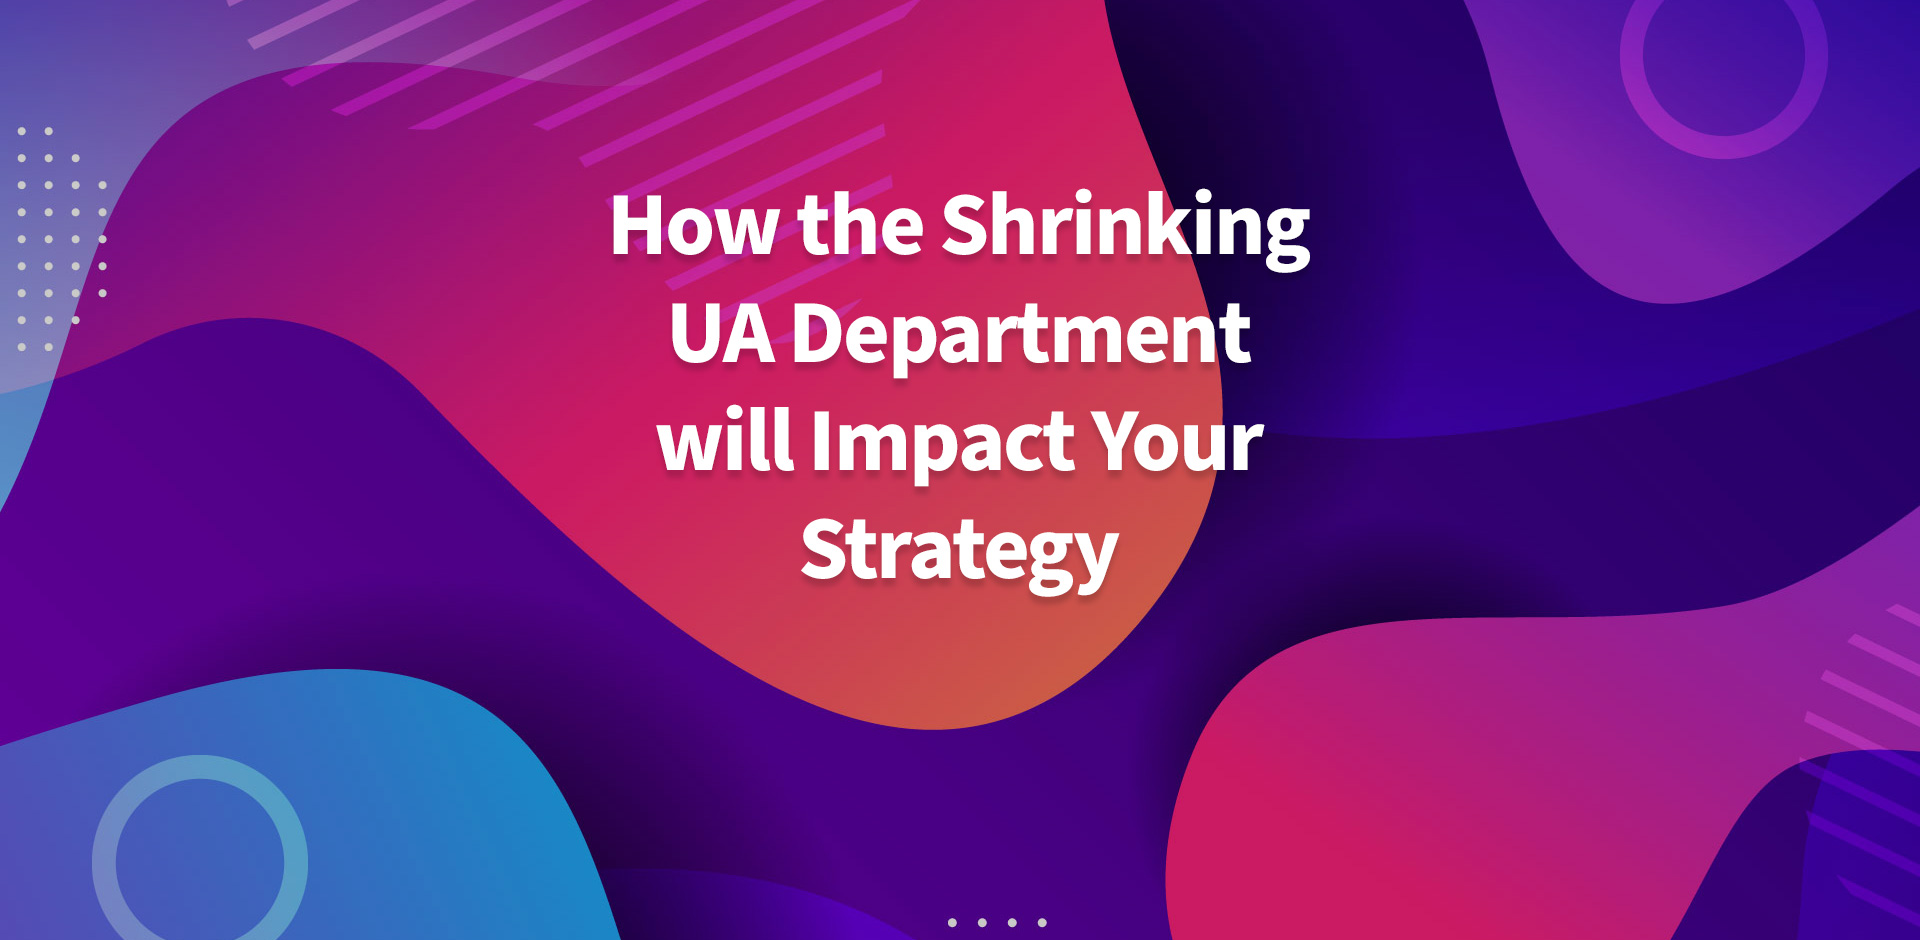 Growth Teams in 2020: How the Shrinking UA Department will Impact Your Strategy